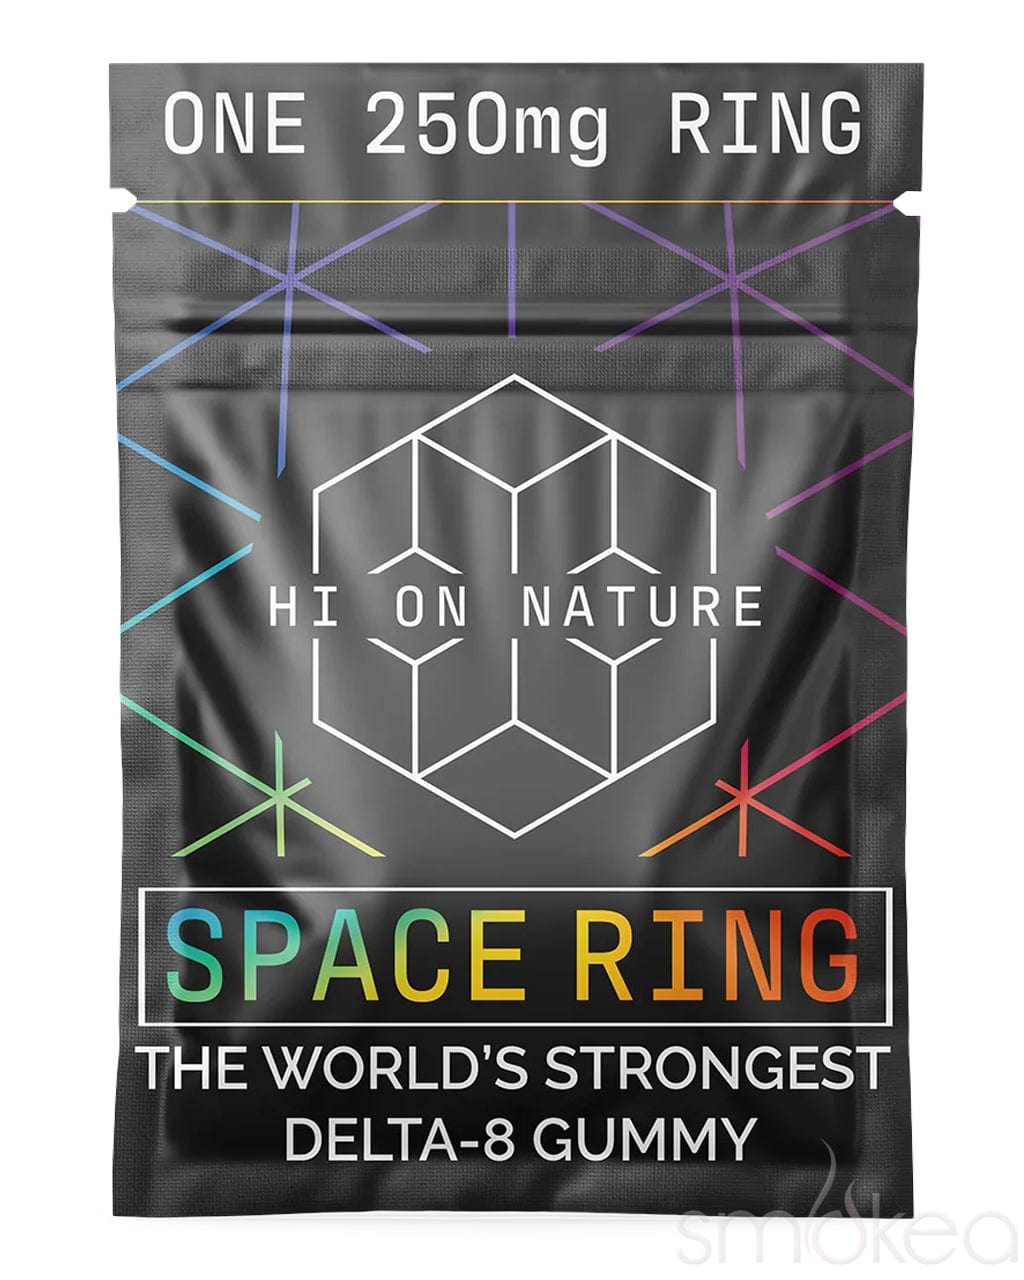 Hi On Nature 250mg Delta 8 Space Ring Gummy